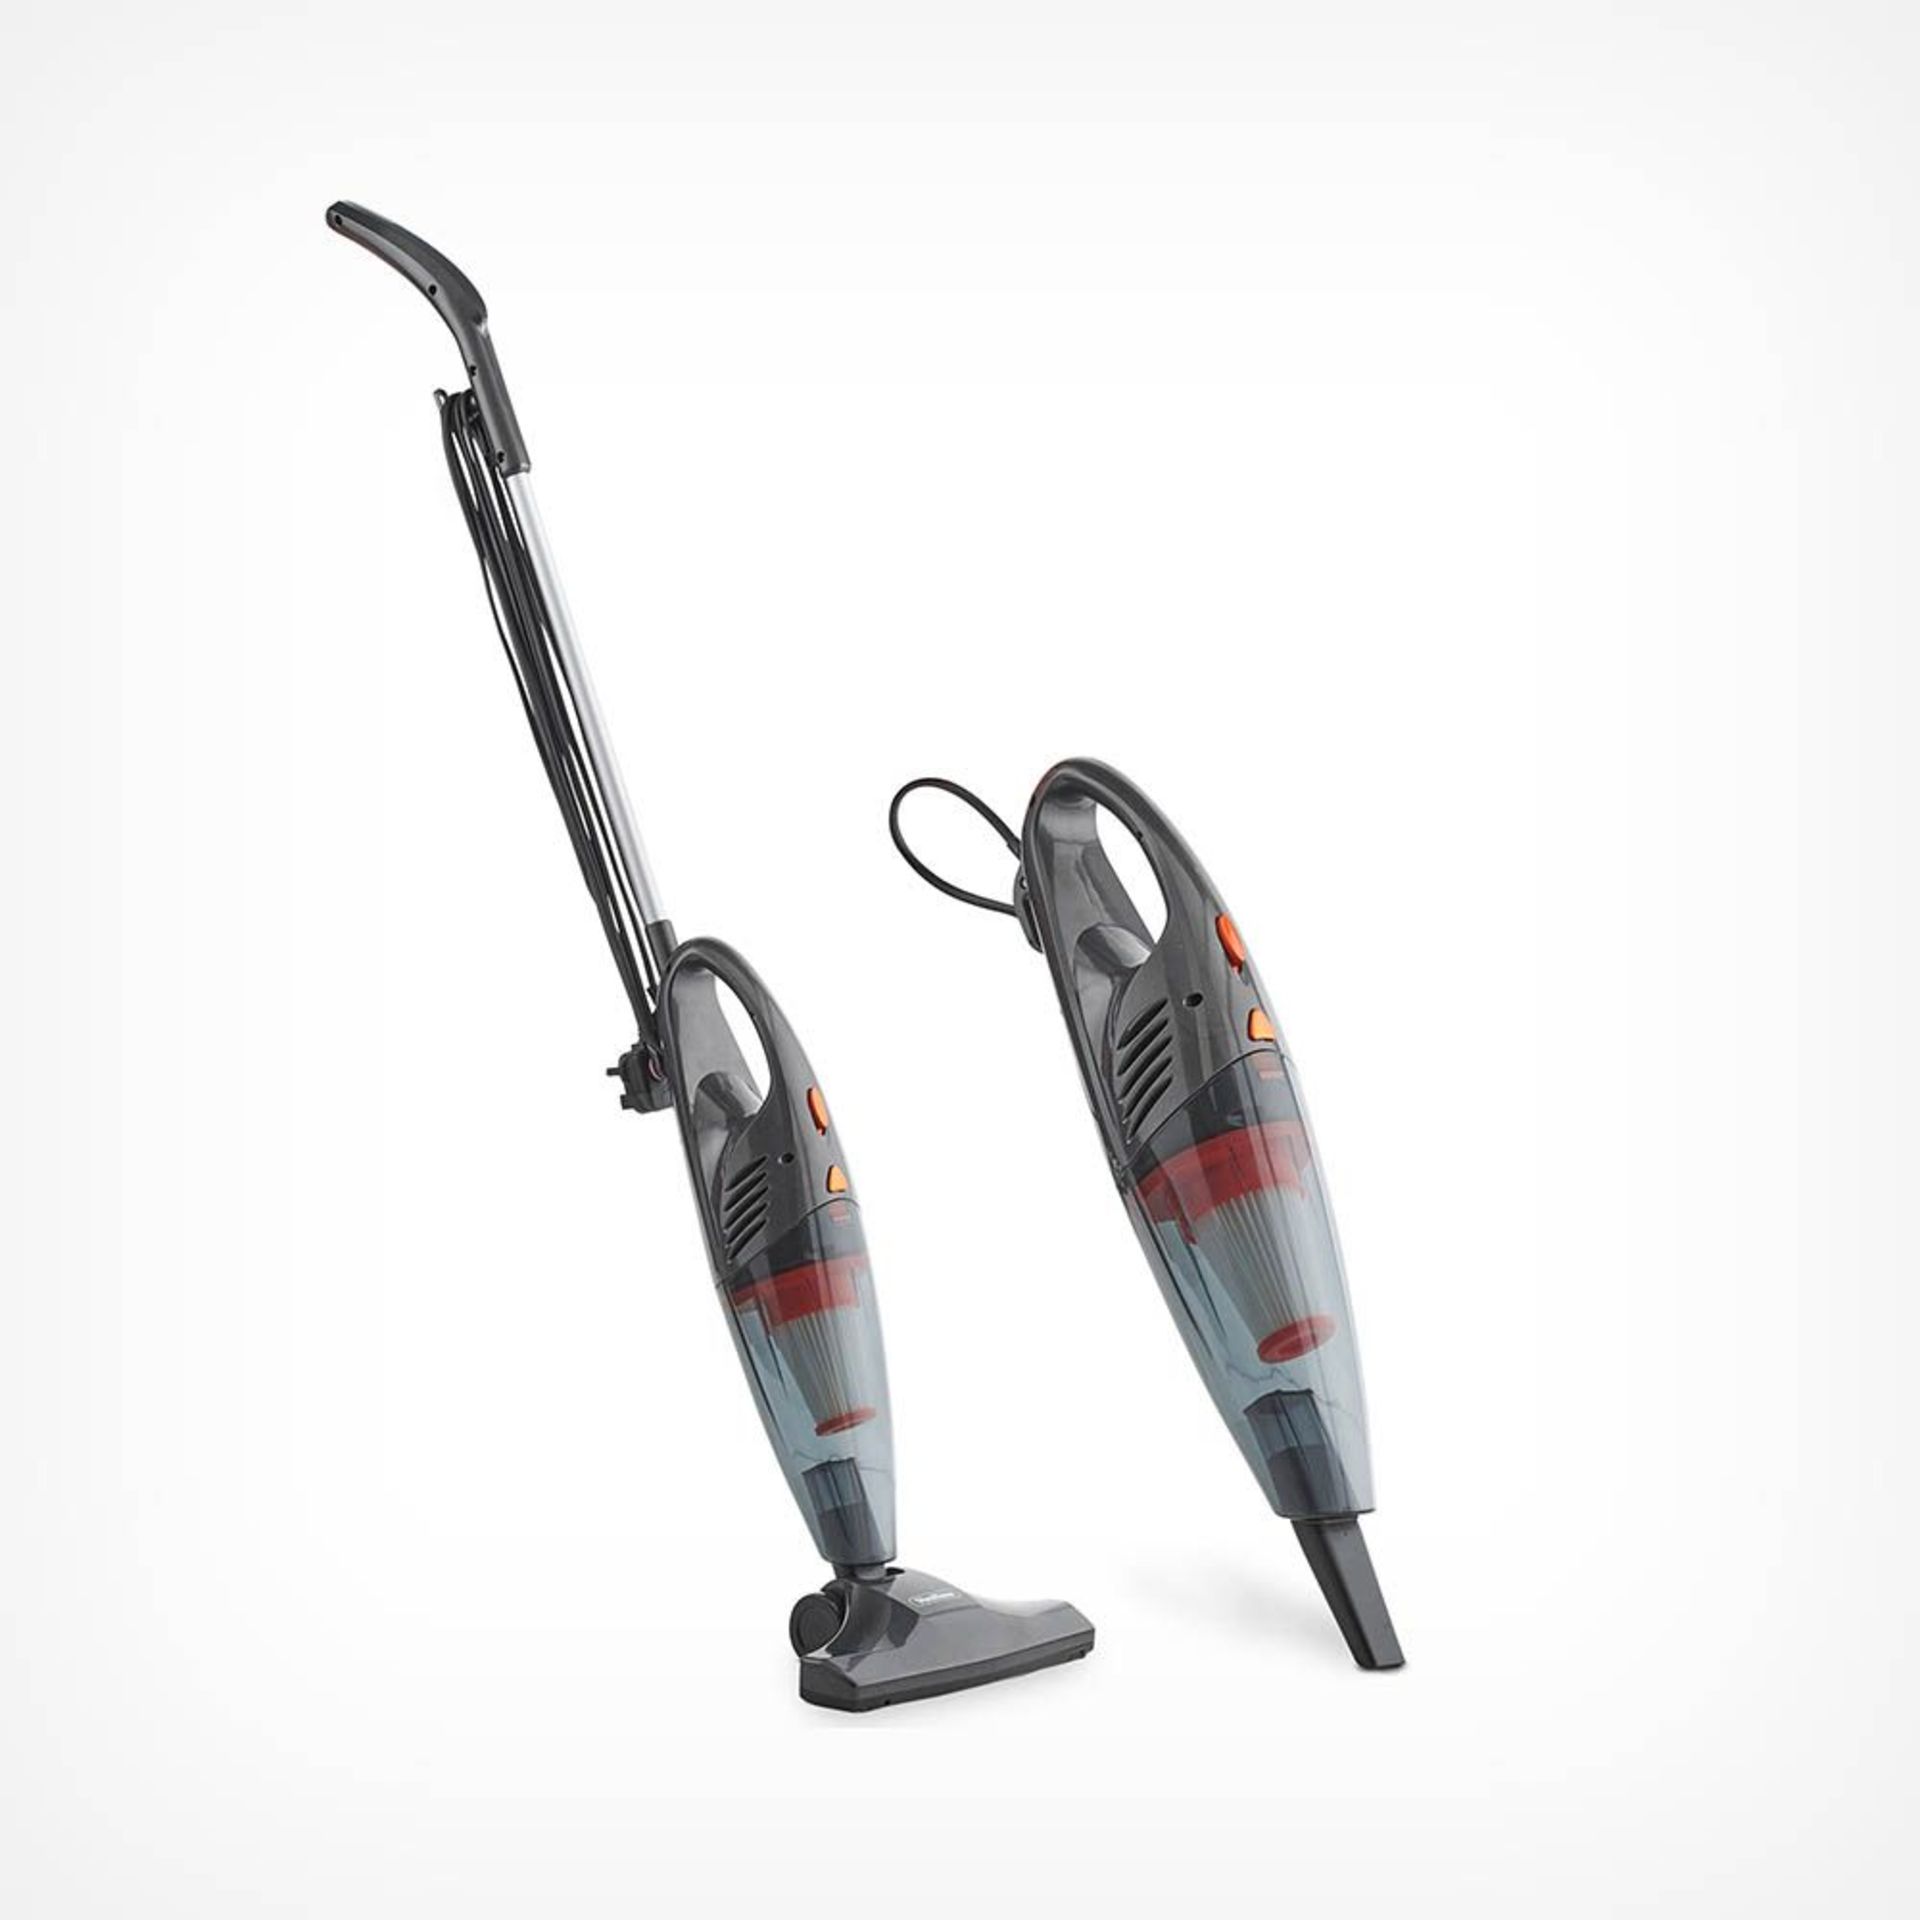 2 in 1 Stick Vacuum 600W - Grey. - BI. Don’t struggle with large, heavy vacuum cleaners - with